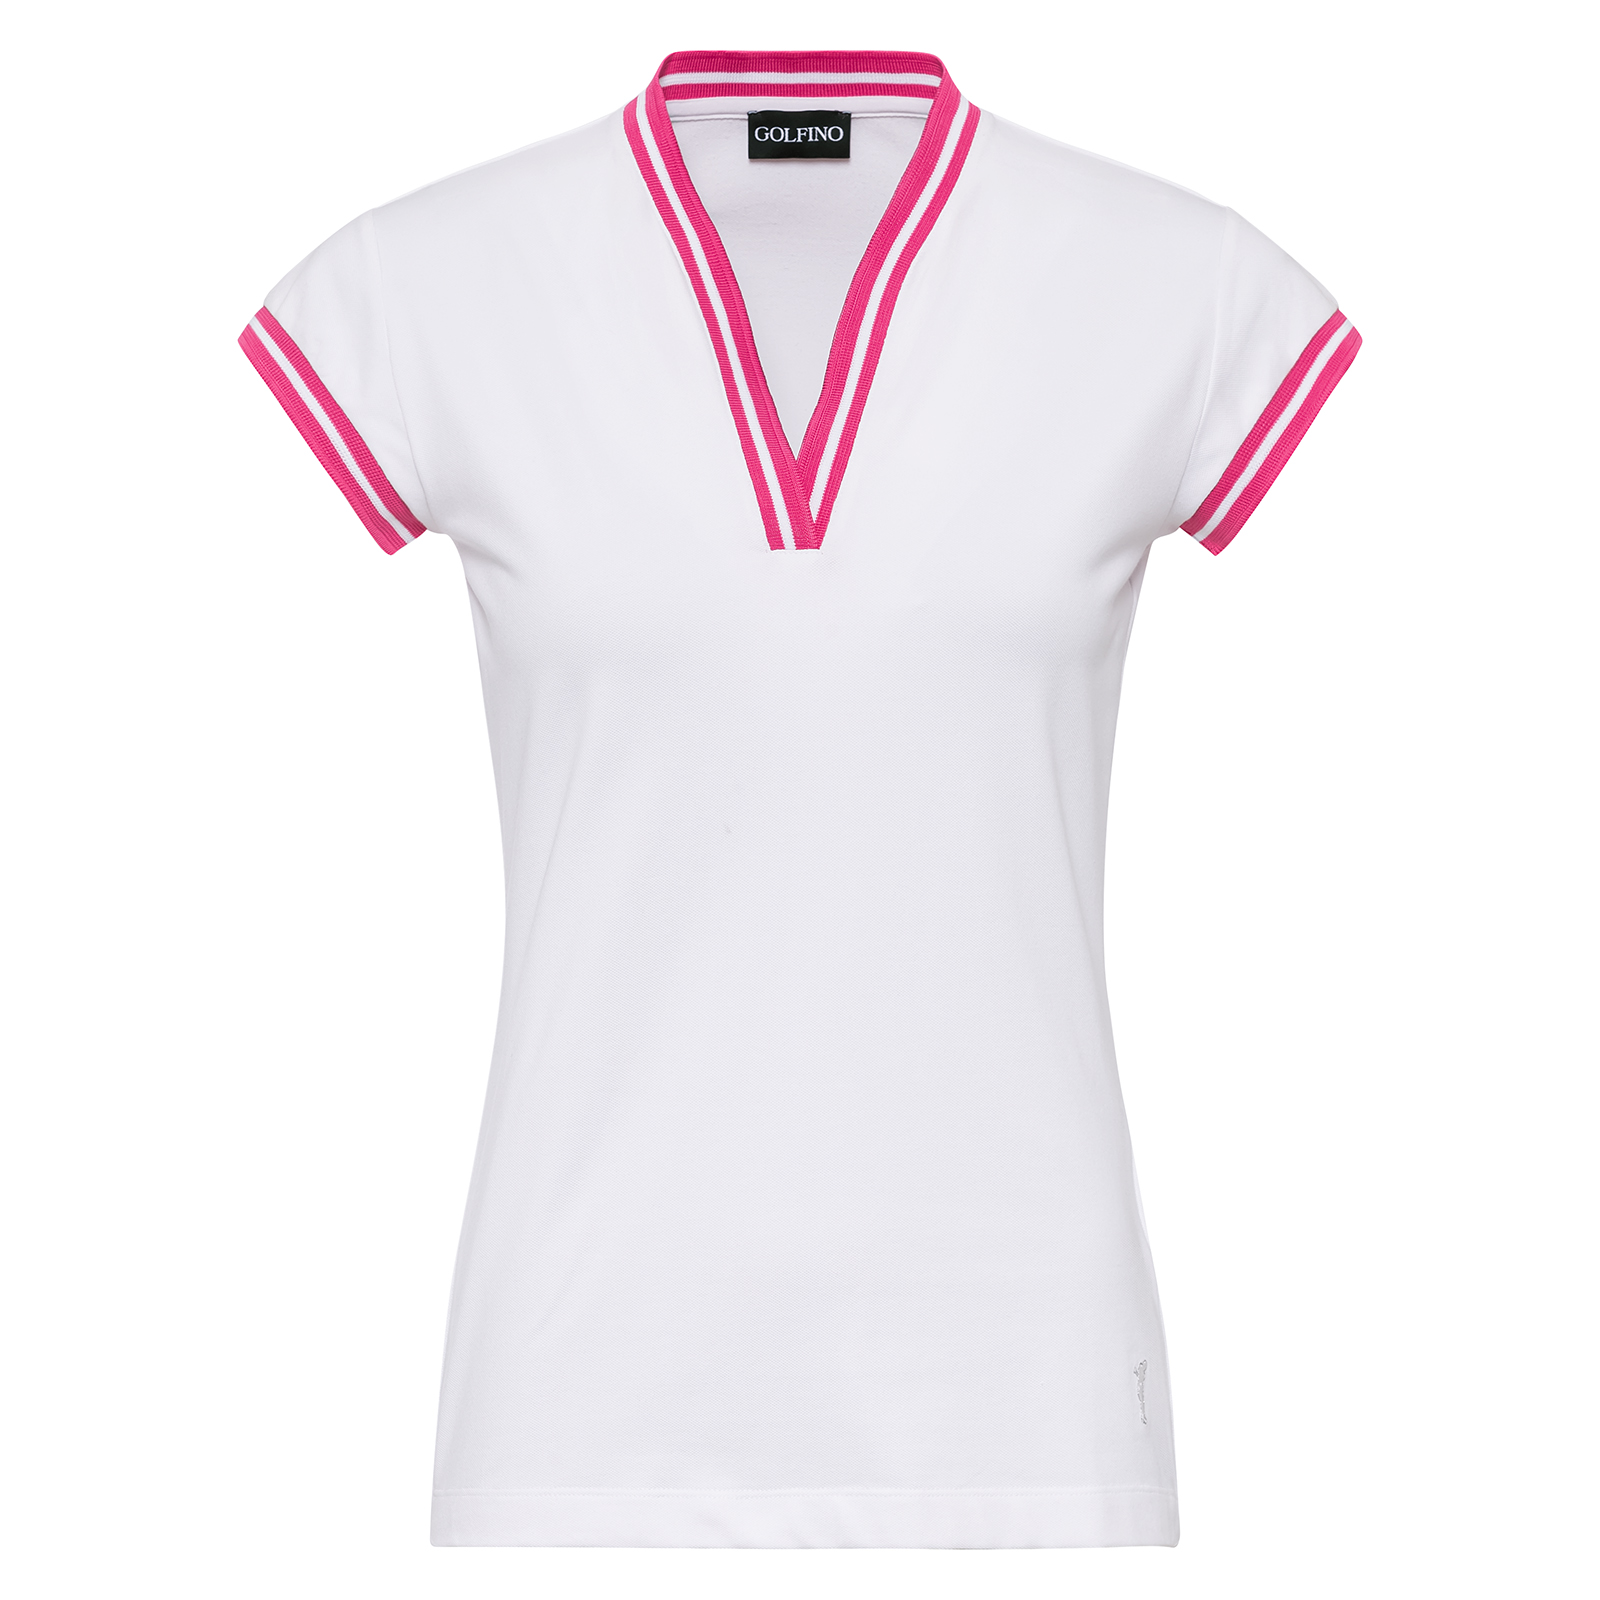 Ladies' golf shirt with ultraviolet protection 